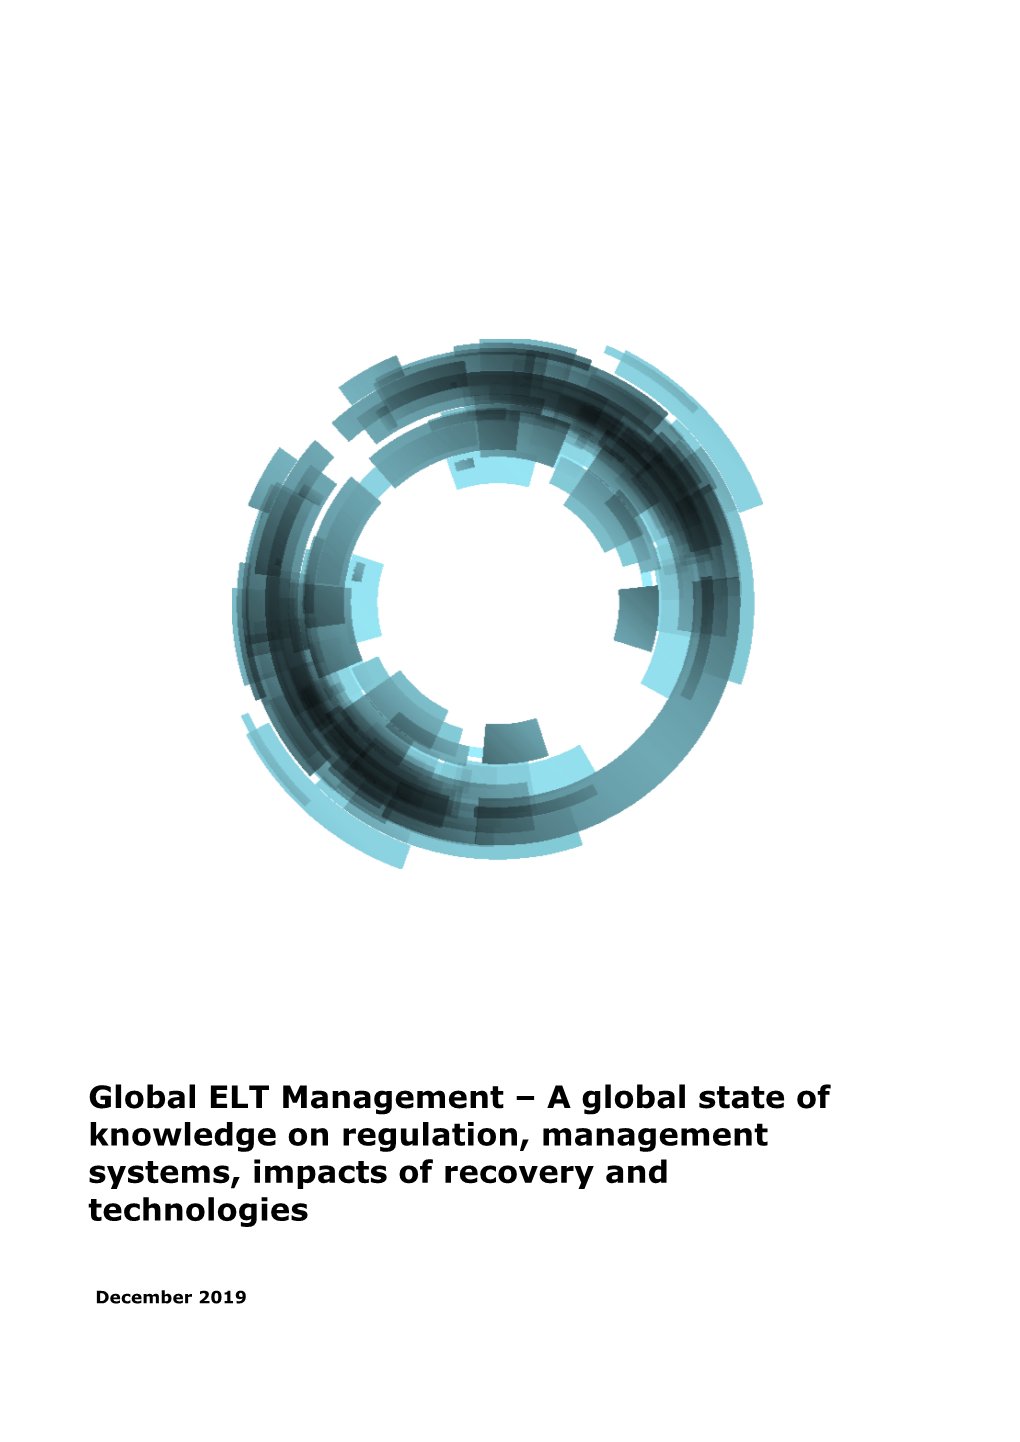 Global ELT Management – a Global State of Knowledge on Regulation, Management Systems, Impacts of Recovery and Technologies